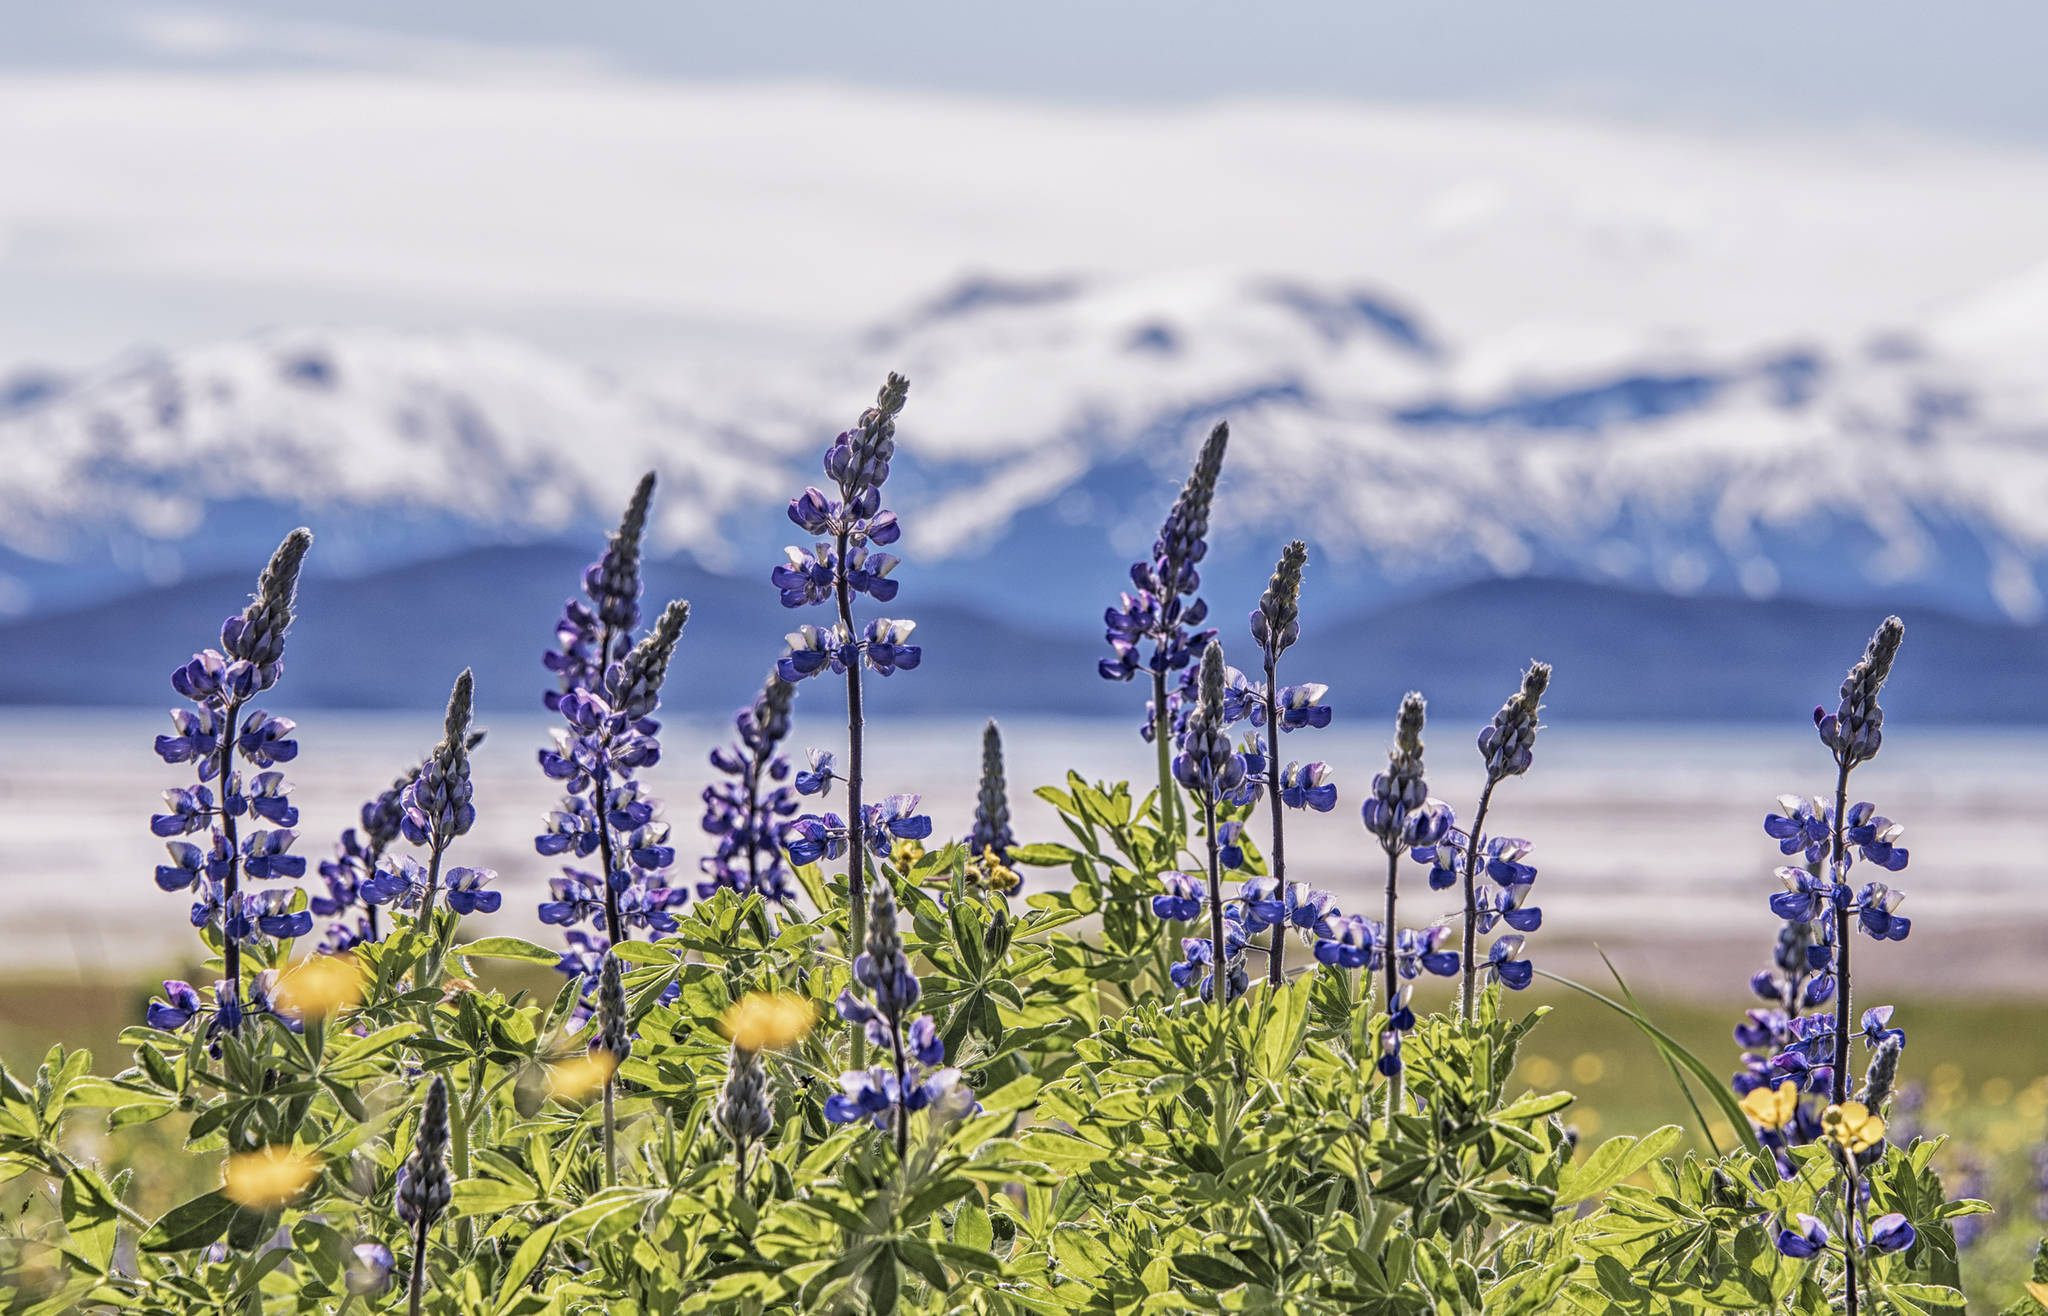 Lupine bloom by Eagle Beach with the Chilkat Range in the background on June 17, 2021. (Courtesy Photo / Kenneth Gill, gillfoto)